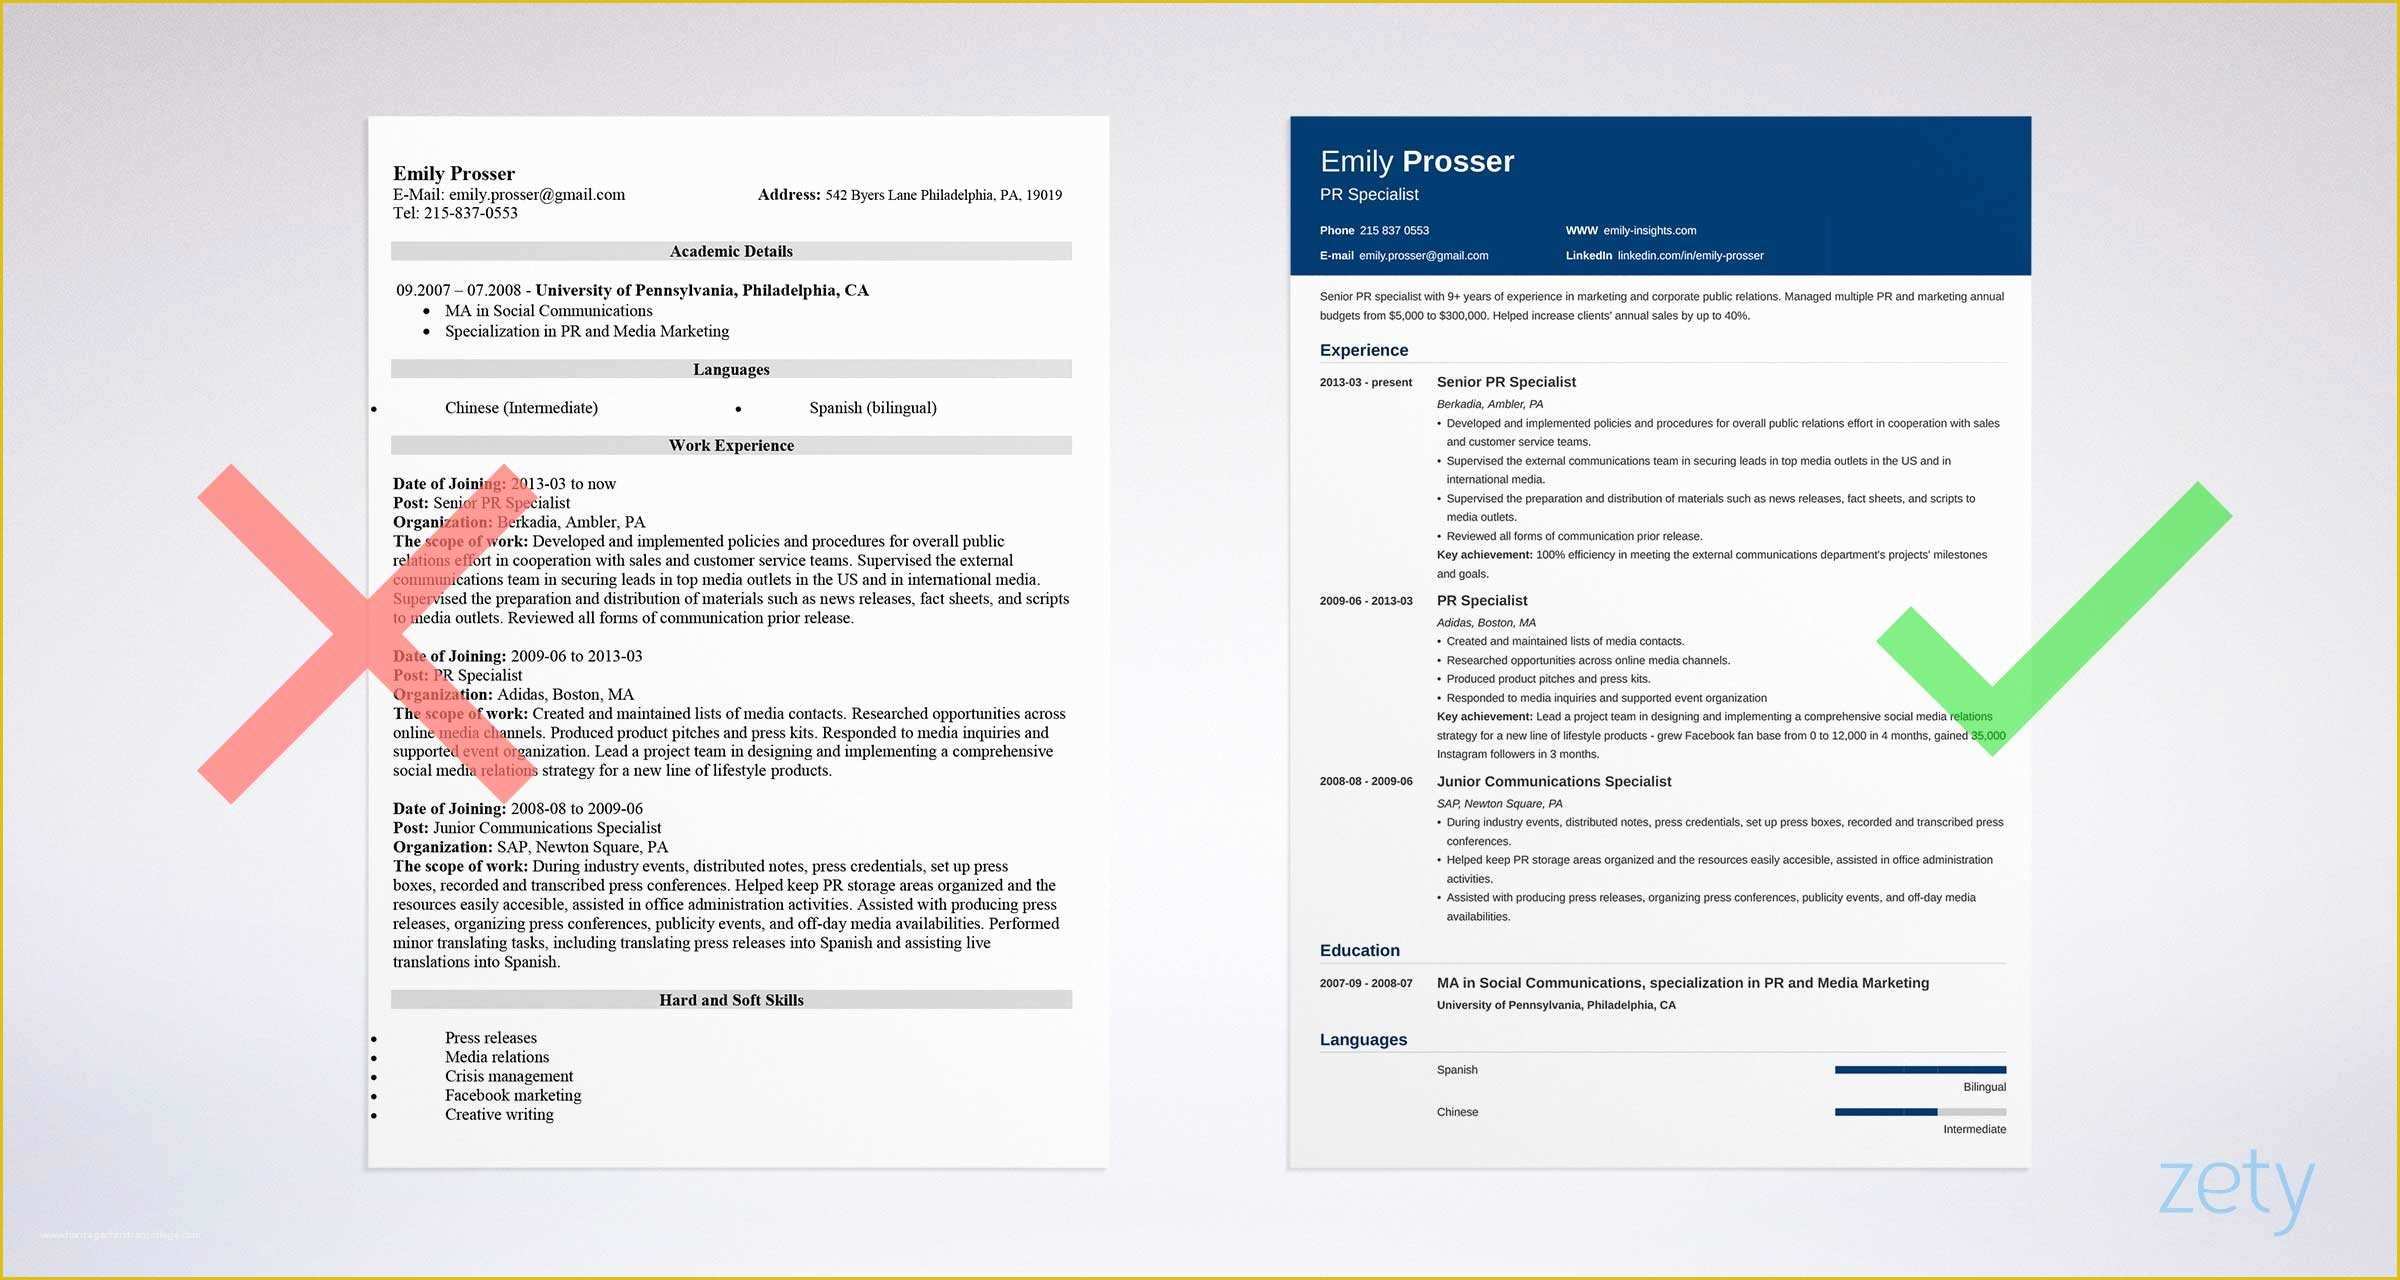 Google Docs Resume Template Free Of Google Docs Resume Templates 10 Examples to Download